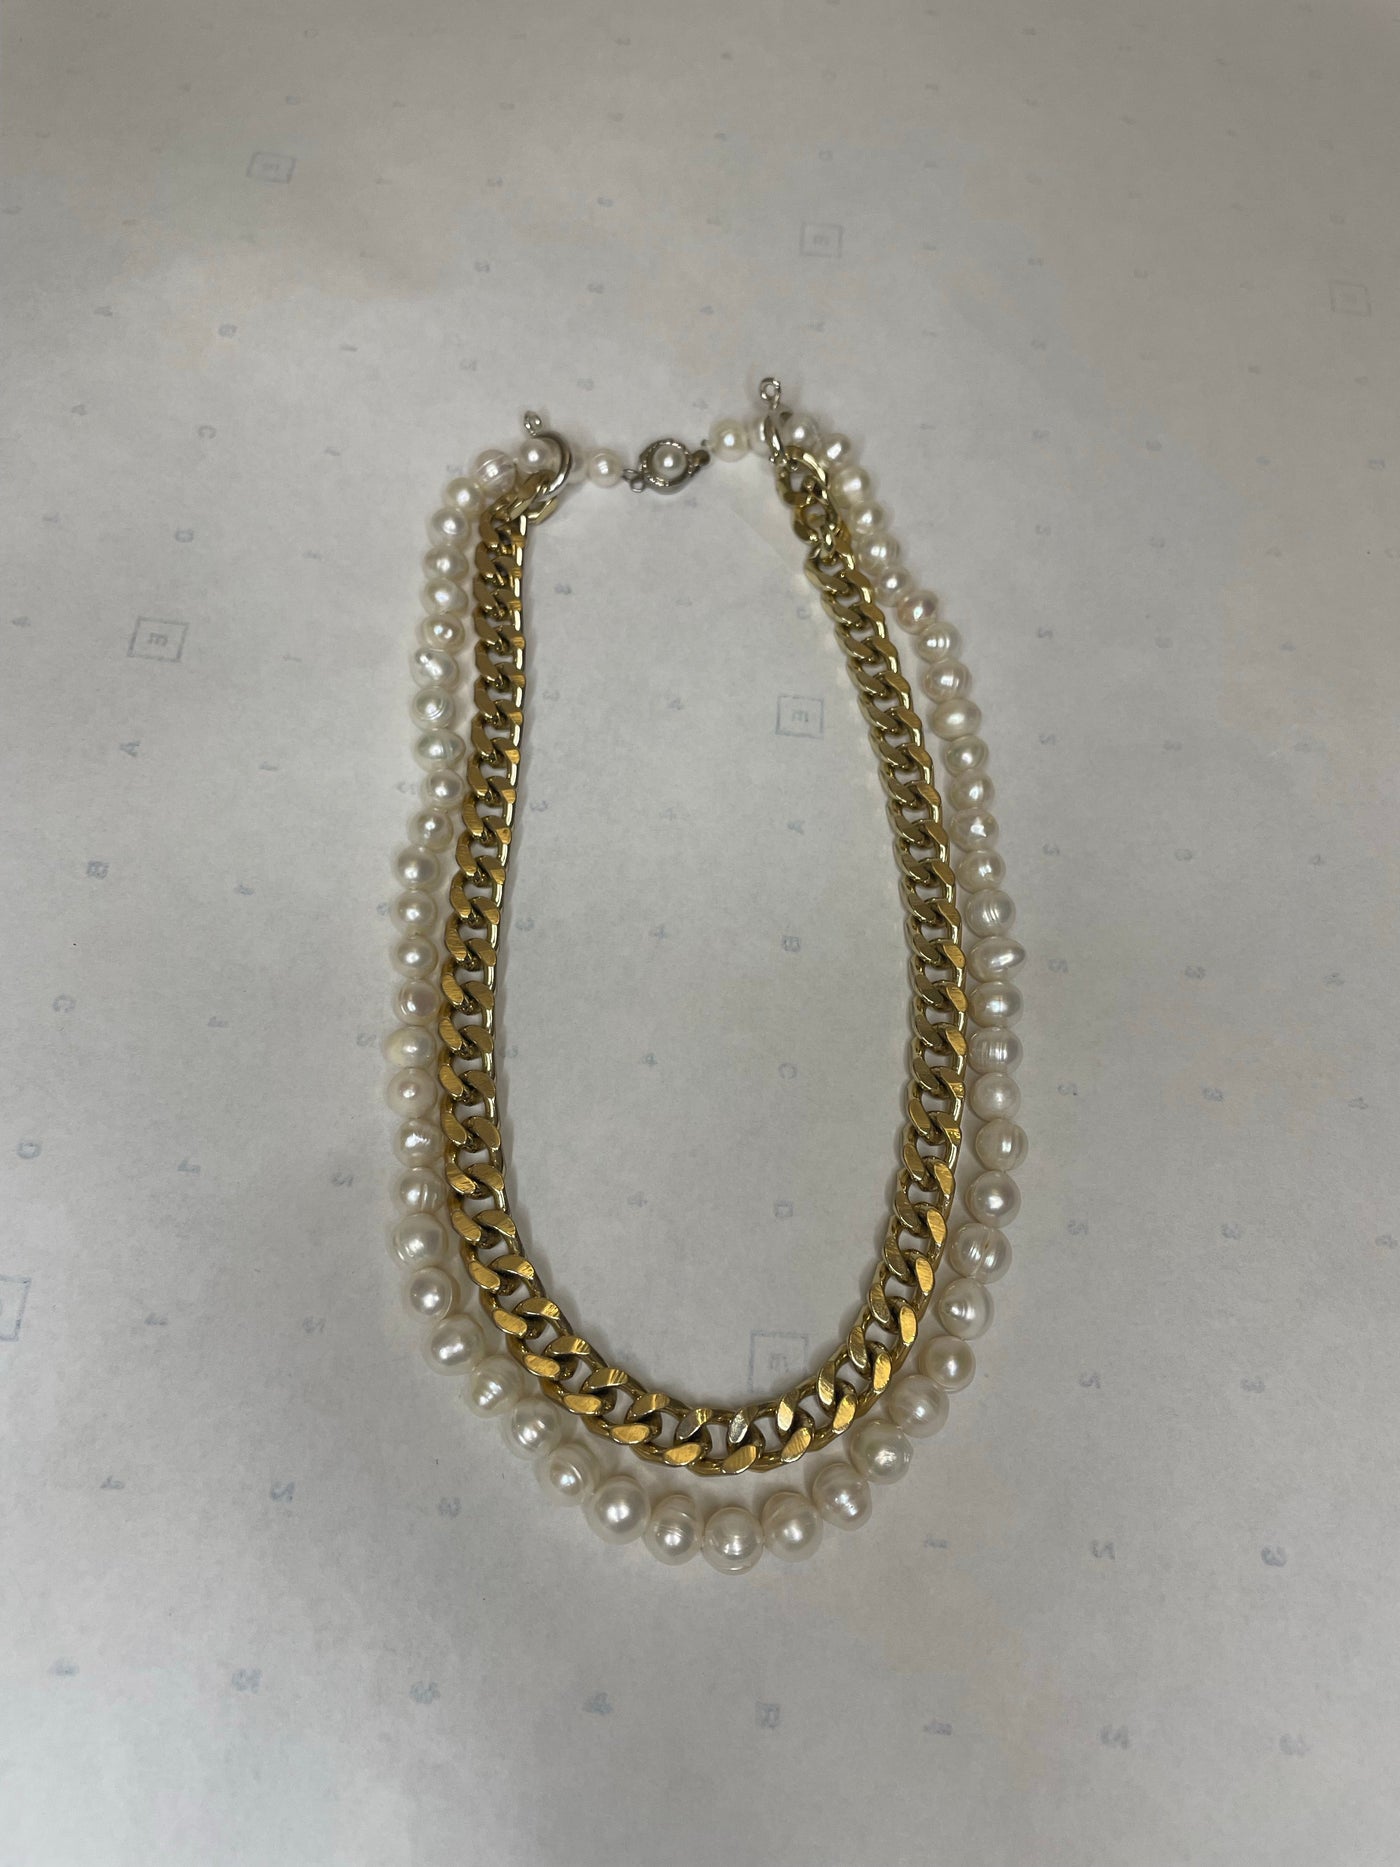 Amy Pearl & Chain necklace